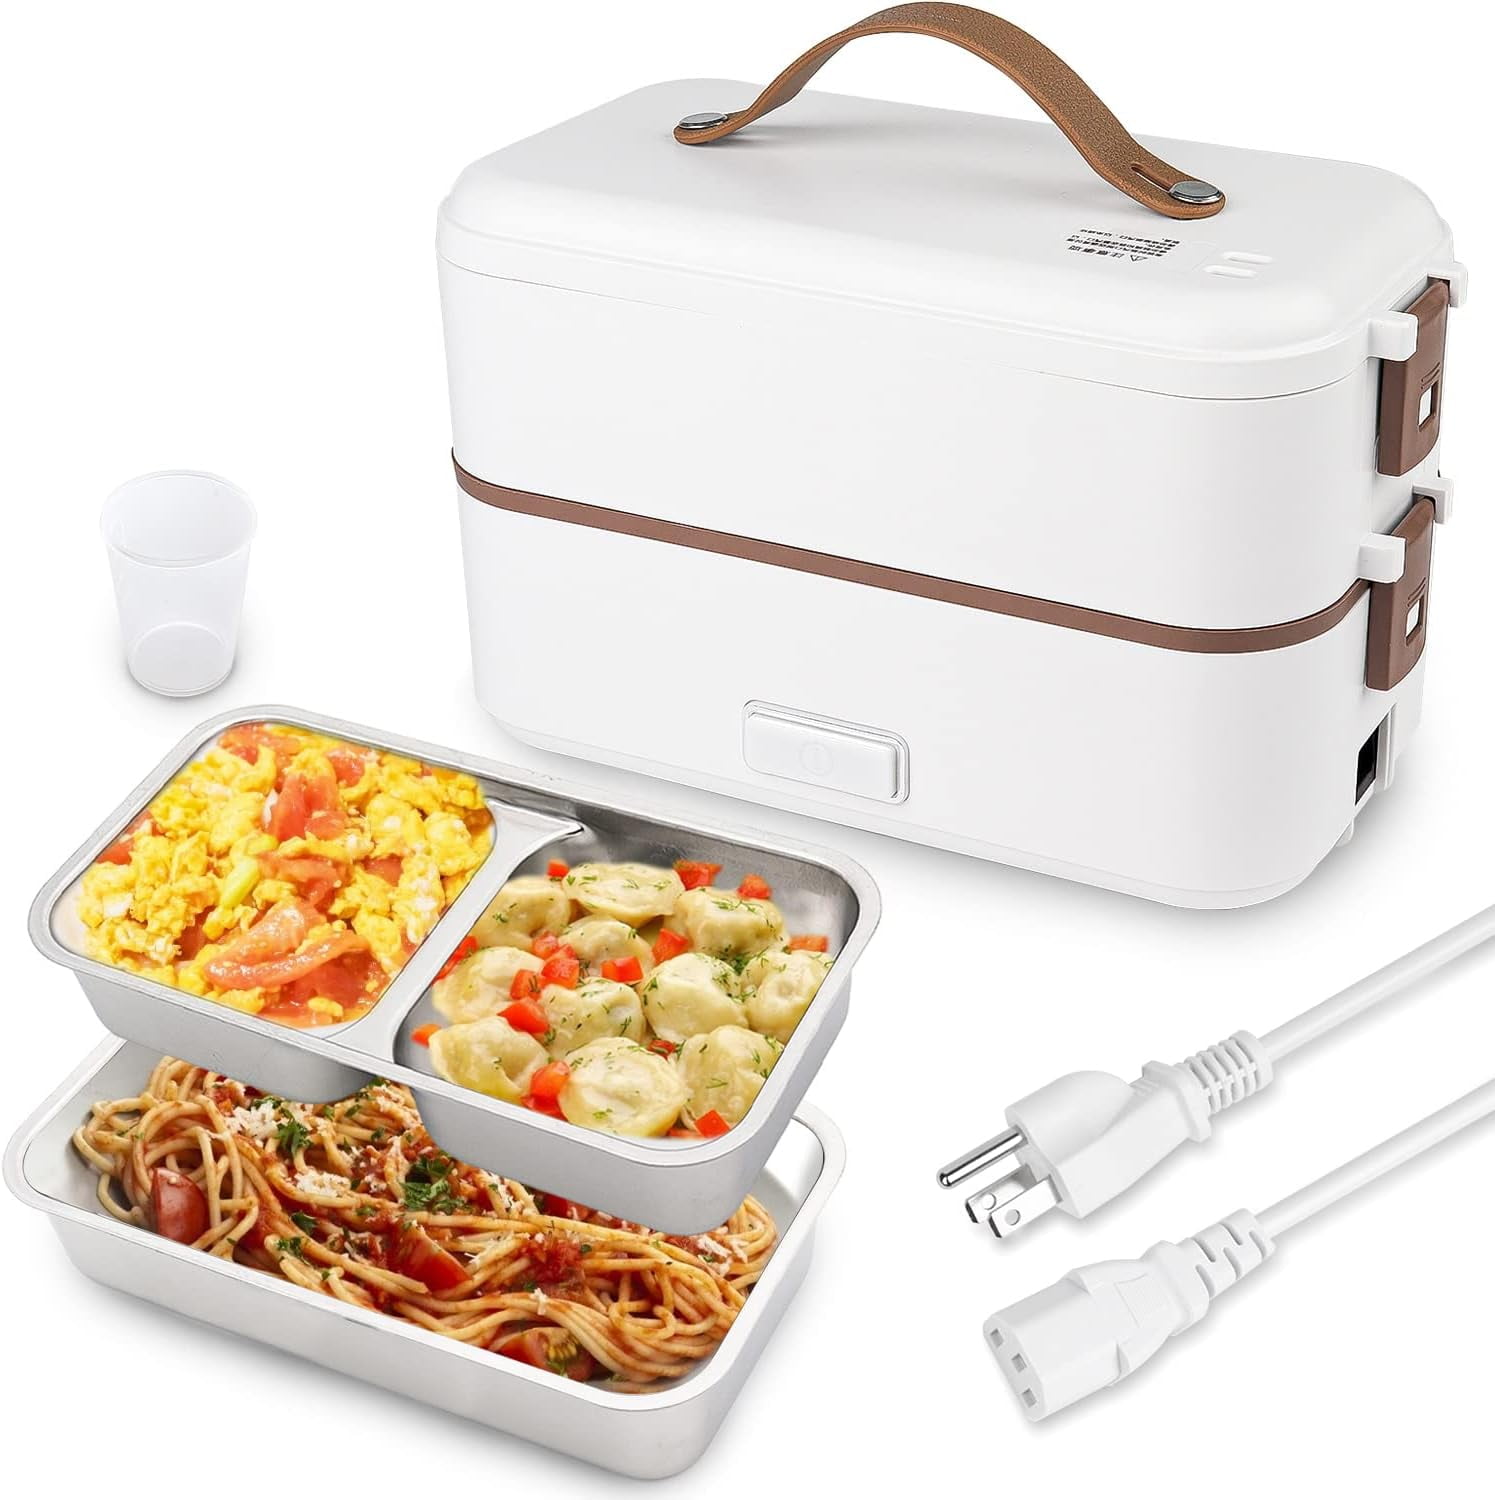  LIZEALUCKY Portable 100‑240V Household Electric Plug In Lunch  Box Split Mini Electric Lunch Box Home Multifunctional Food Warmer Food  Grade Material(US Plug): Home & Kitchen